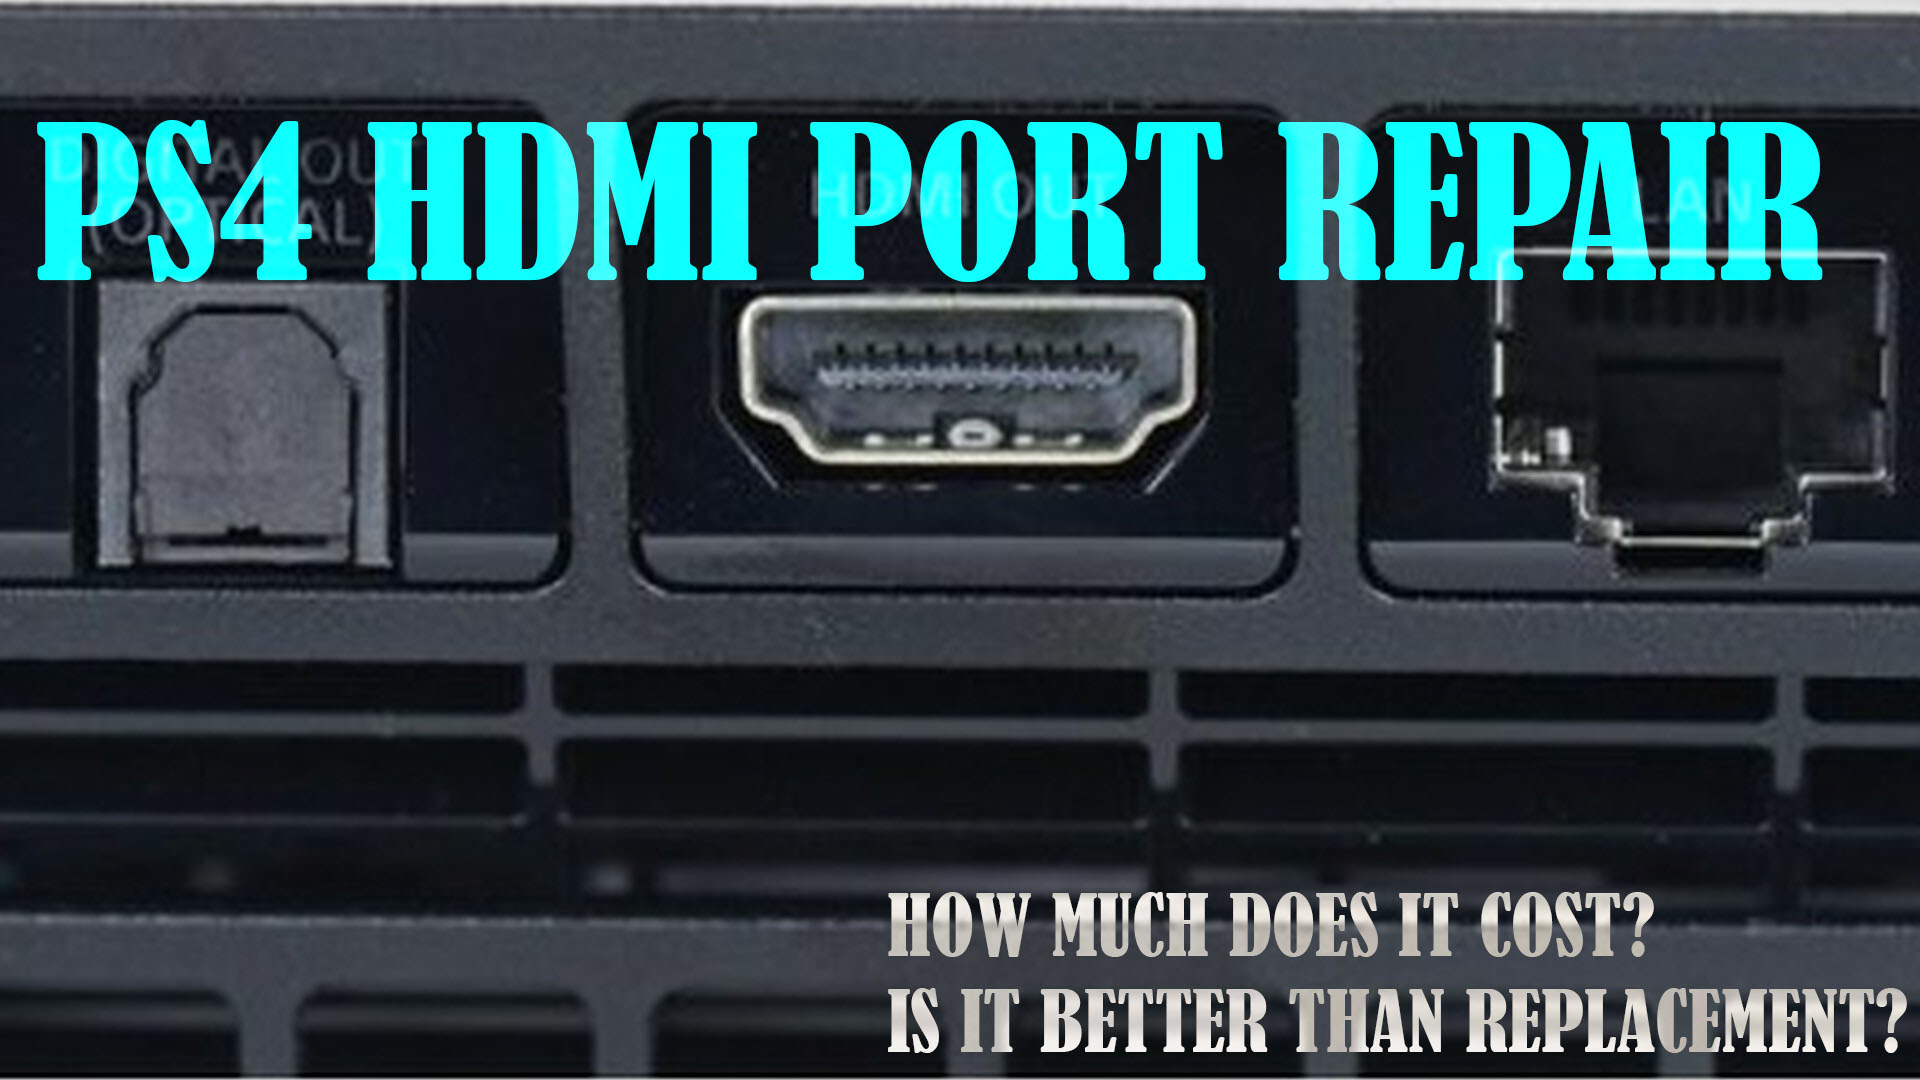 dybde enkel mikrobølgeovn PS4 HDMI Port Repair | How much does it cost?